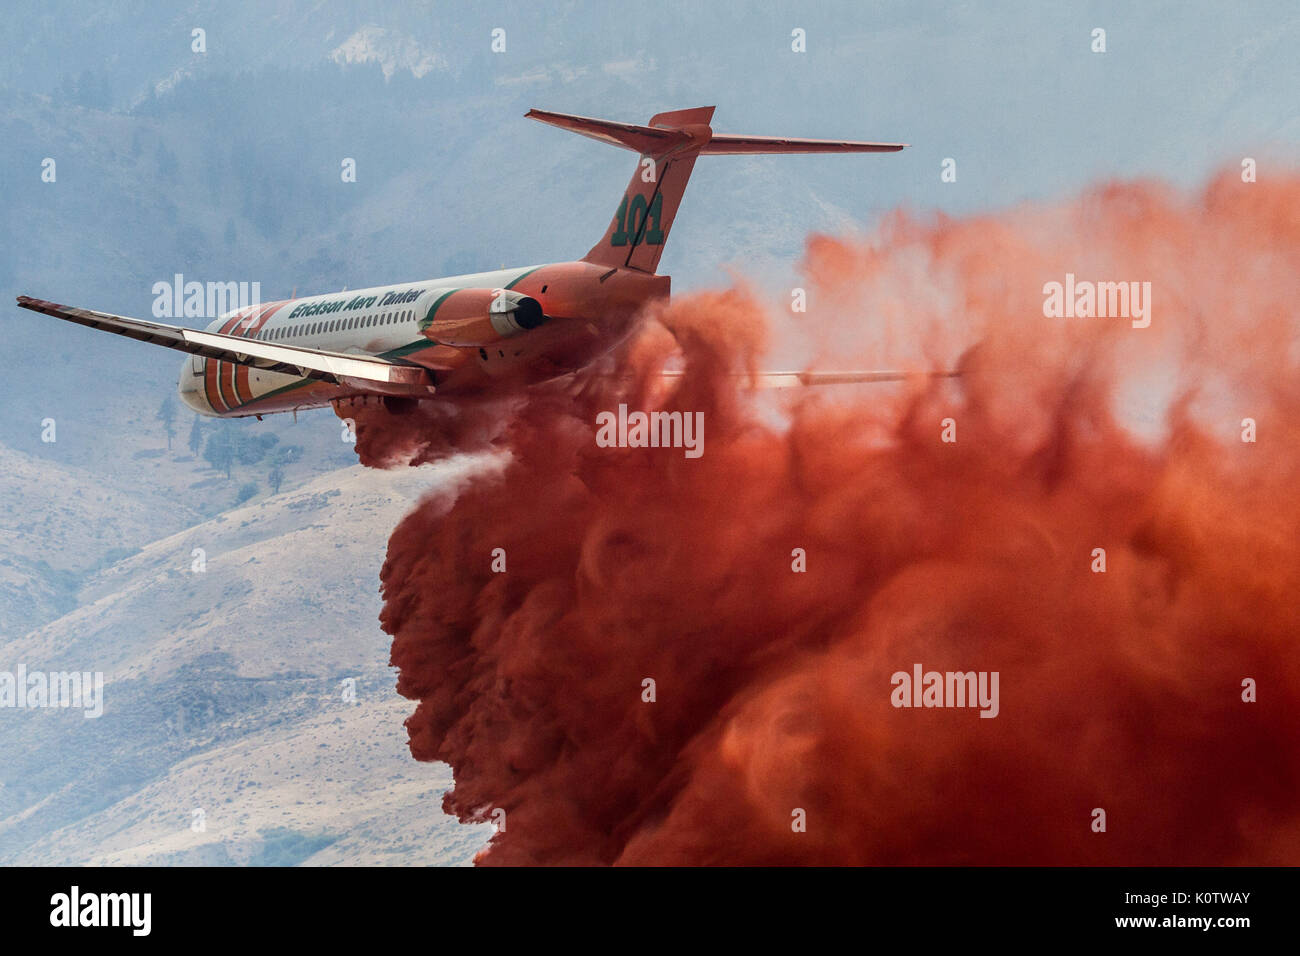 Reno, Nevada, USA. 23rd Aug, 2017. A firefighting airplane drops fire retardant on the Mogul Fire in northwest Reno, Nevada, on Wednesday, August 23, 2017. The cause of the fire has not been determined at this time. Credit: Tracy Barbutes/ZUMA Wire/Alamy Live News Stock Photo